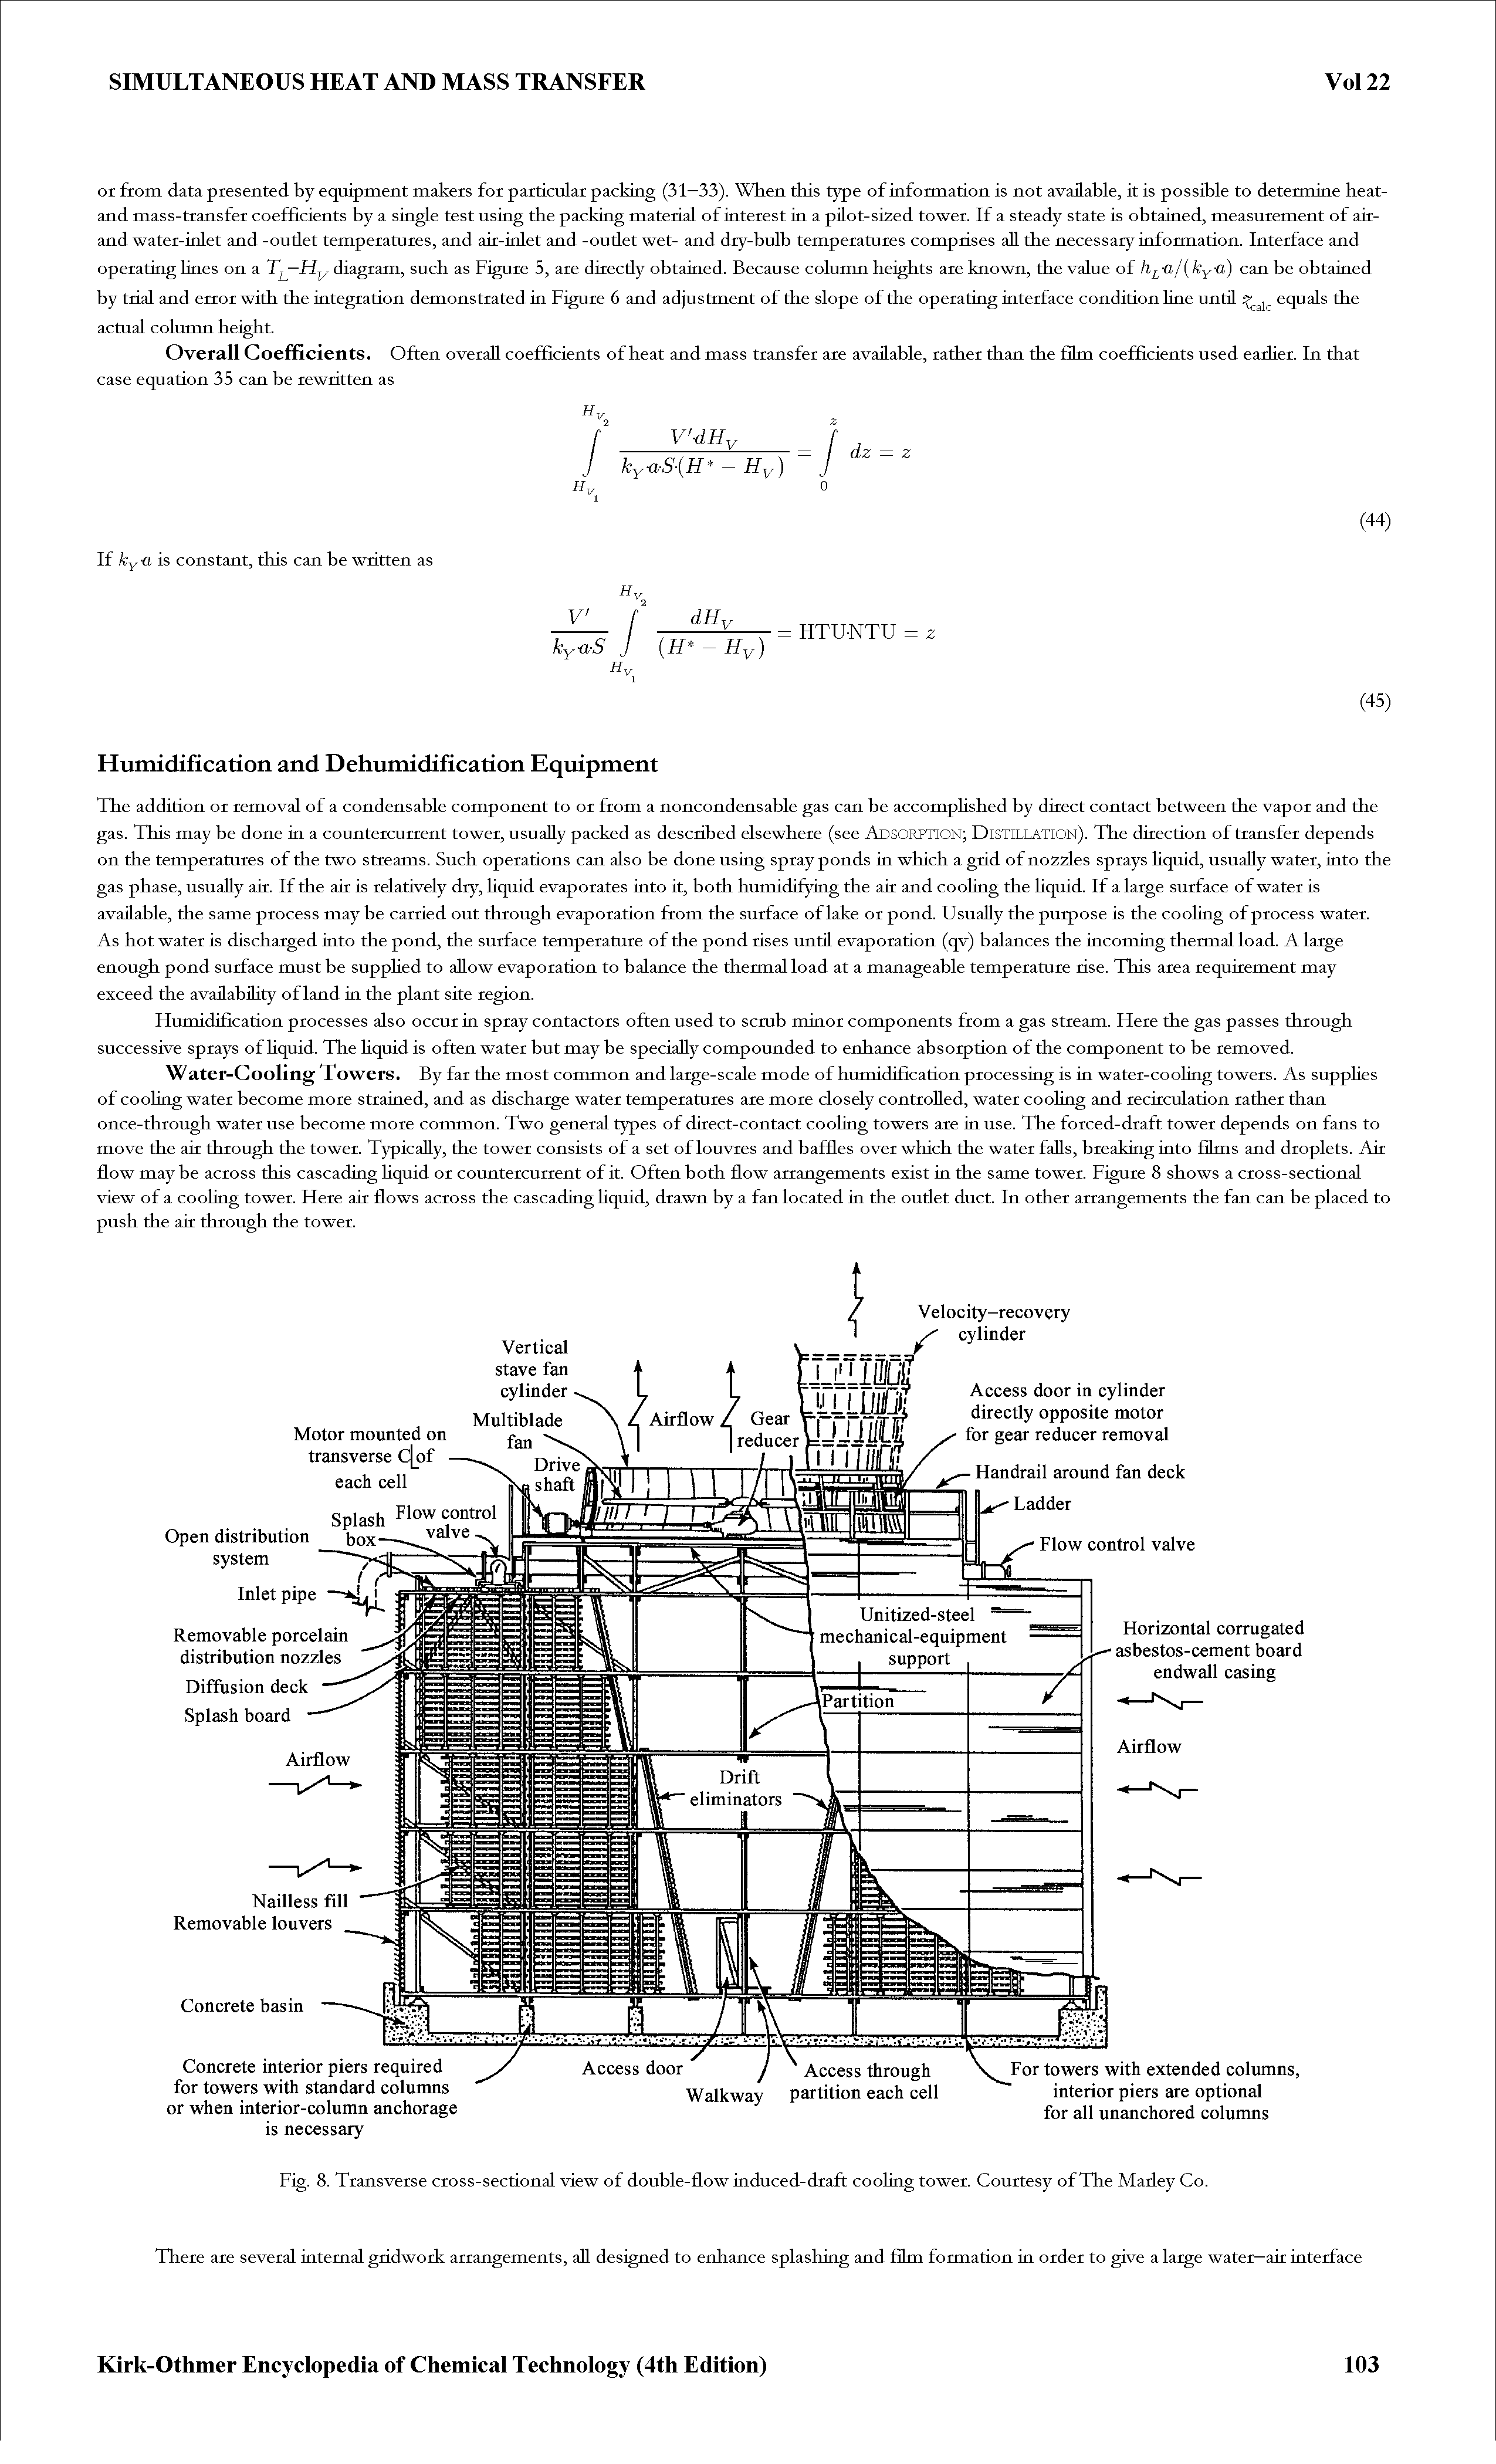 Fig. 8. Transverse cross-sectional view of double-flow induced-draft cooling tower. Courtesy of The Madey Co.